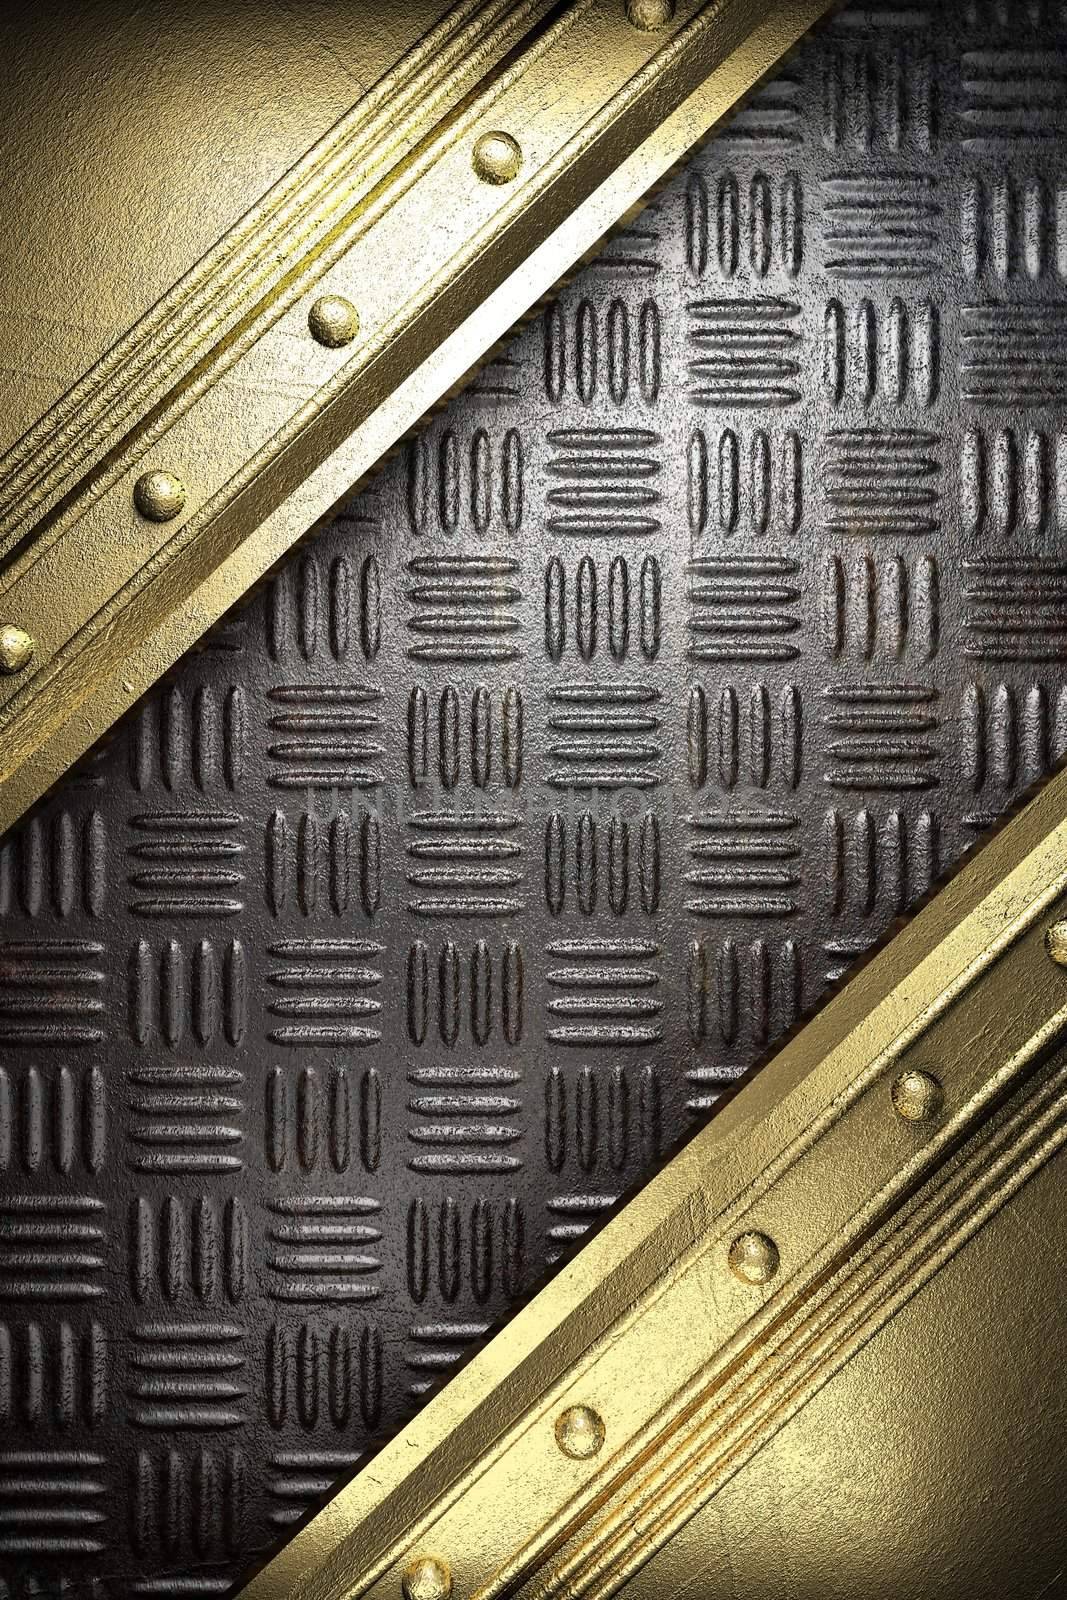 background with gold